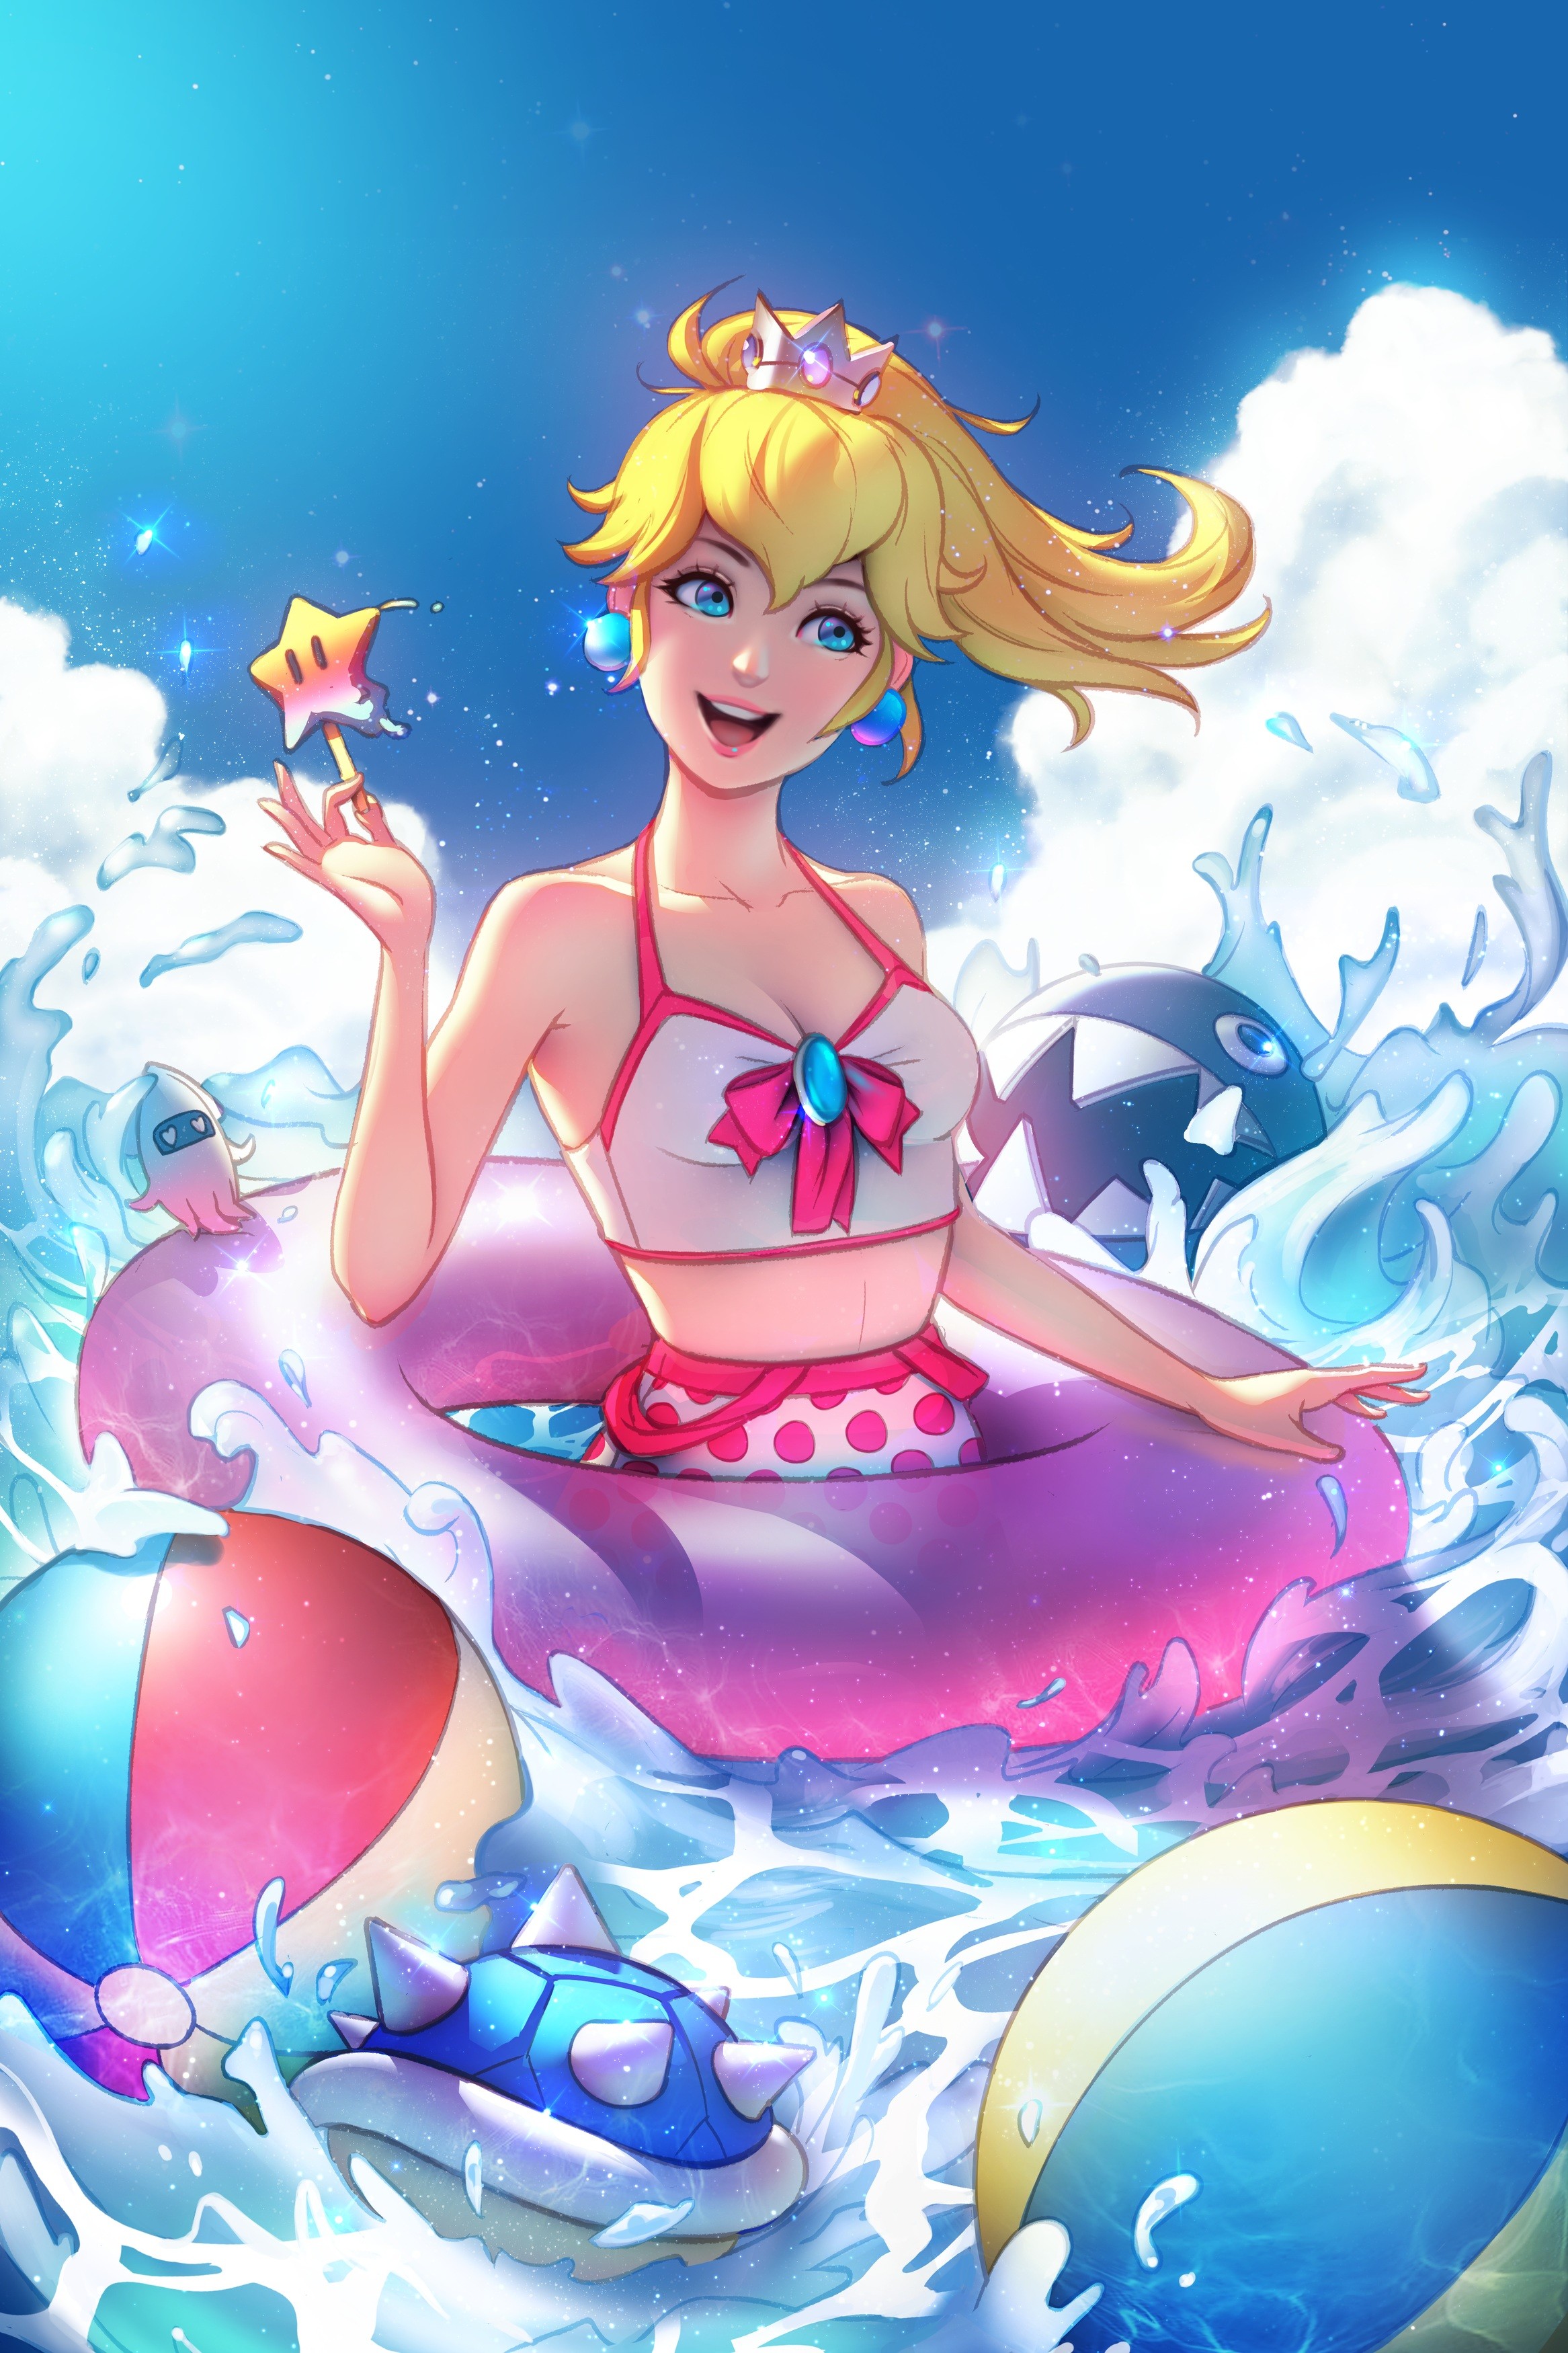 Anime 2333x3500 Jonathan Hamilton blue eyes Princess Peach in water water open mouth blonde happy video games Nintendo fan art video game girls video game characters standing in water beach ball floater